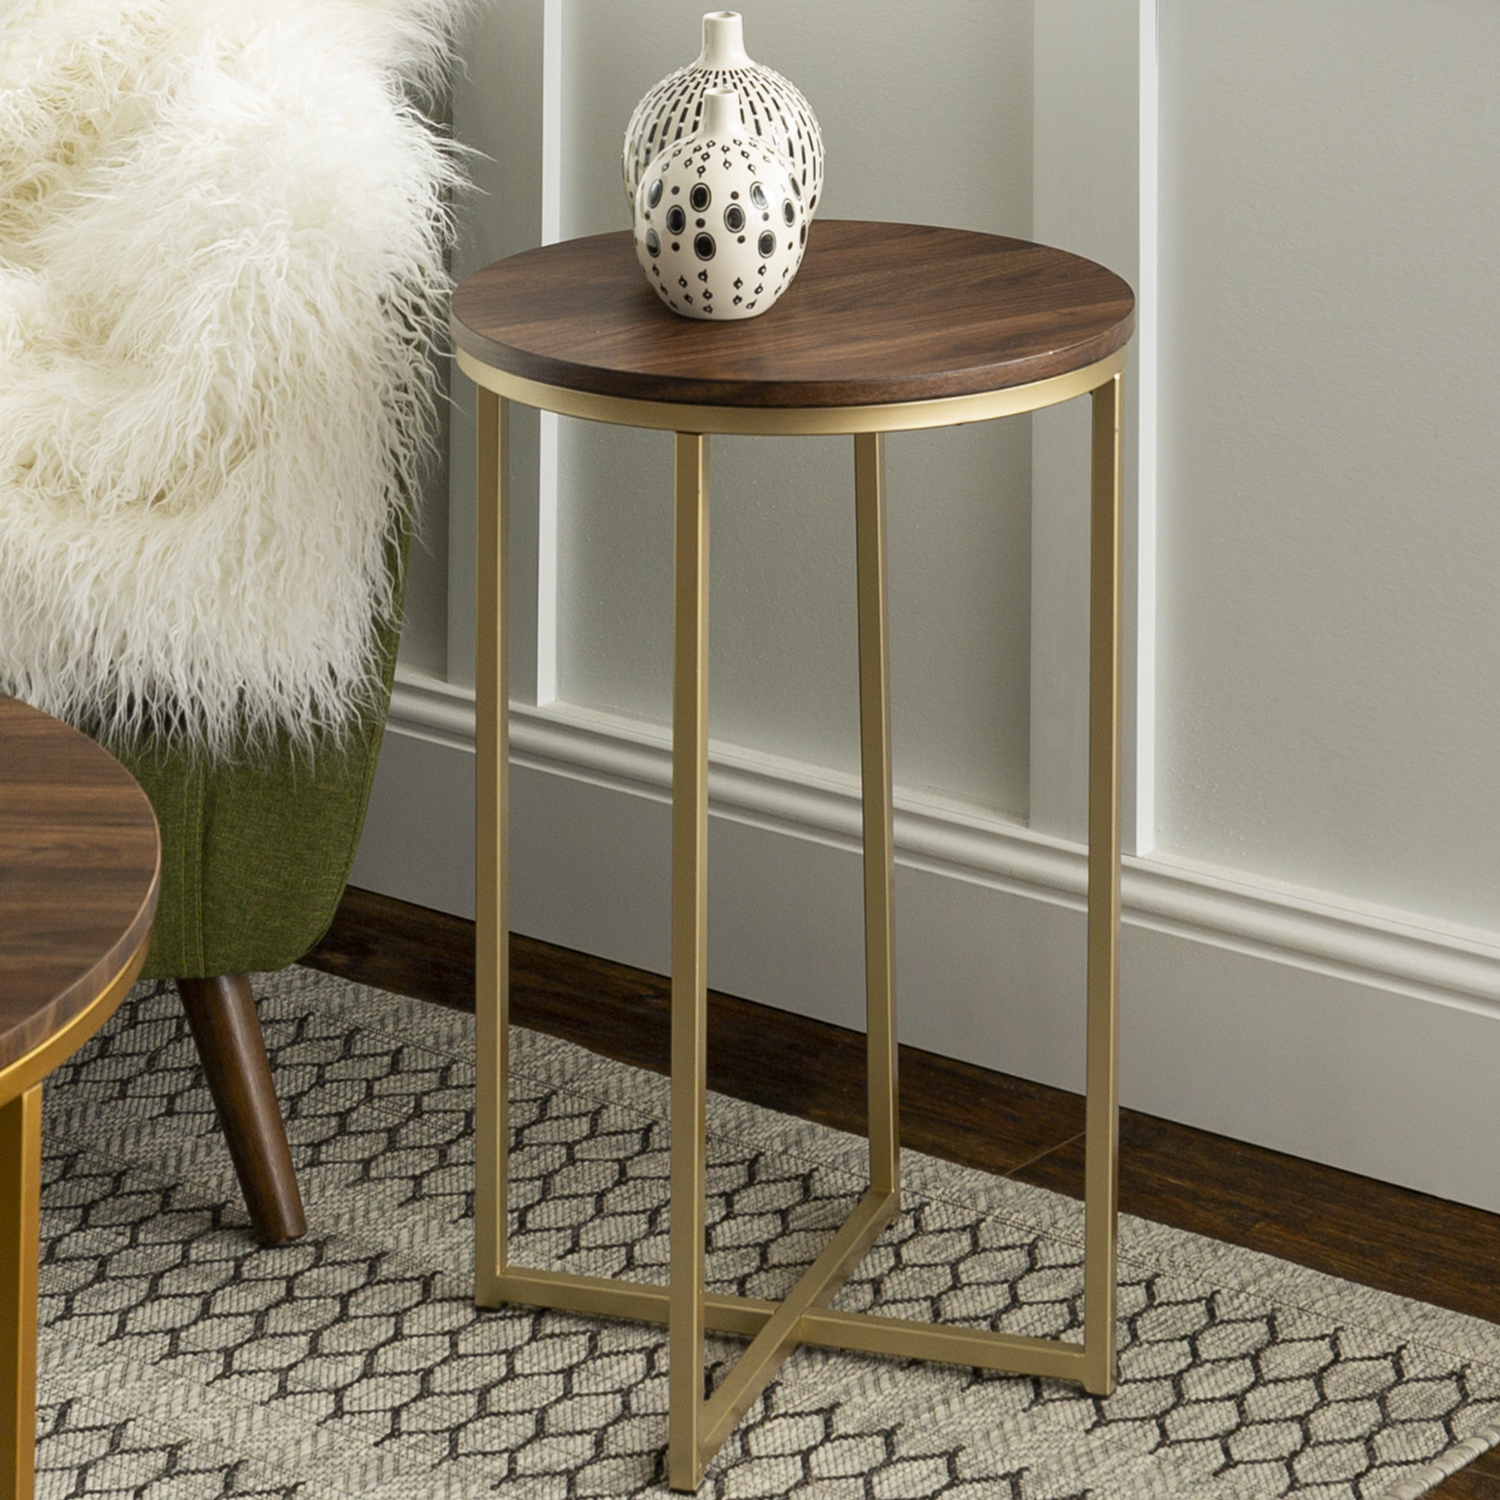 Gold Round Side Table With Dark Wood, Gold Round Side Table